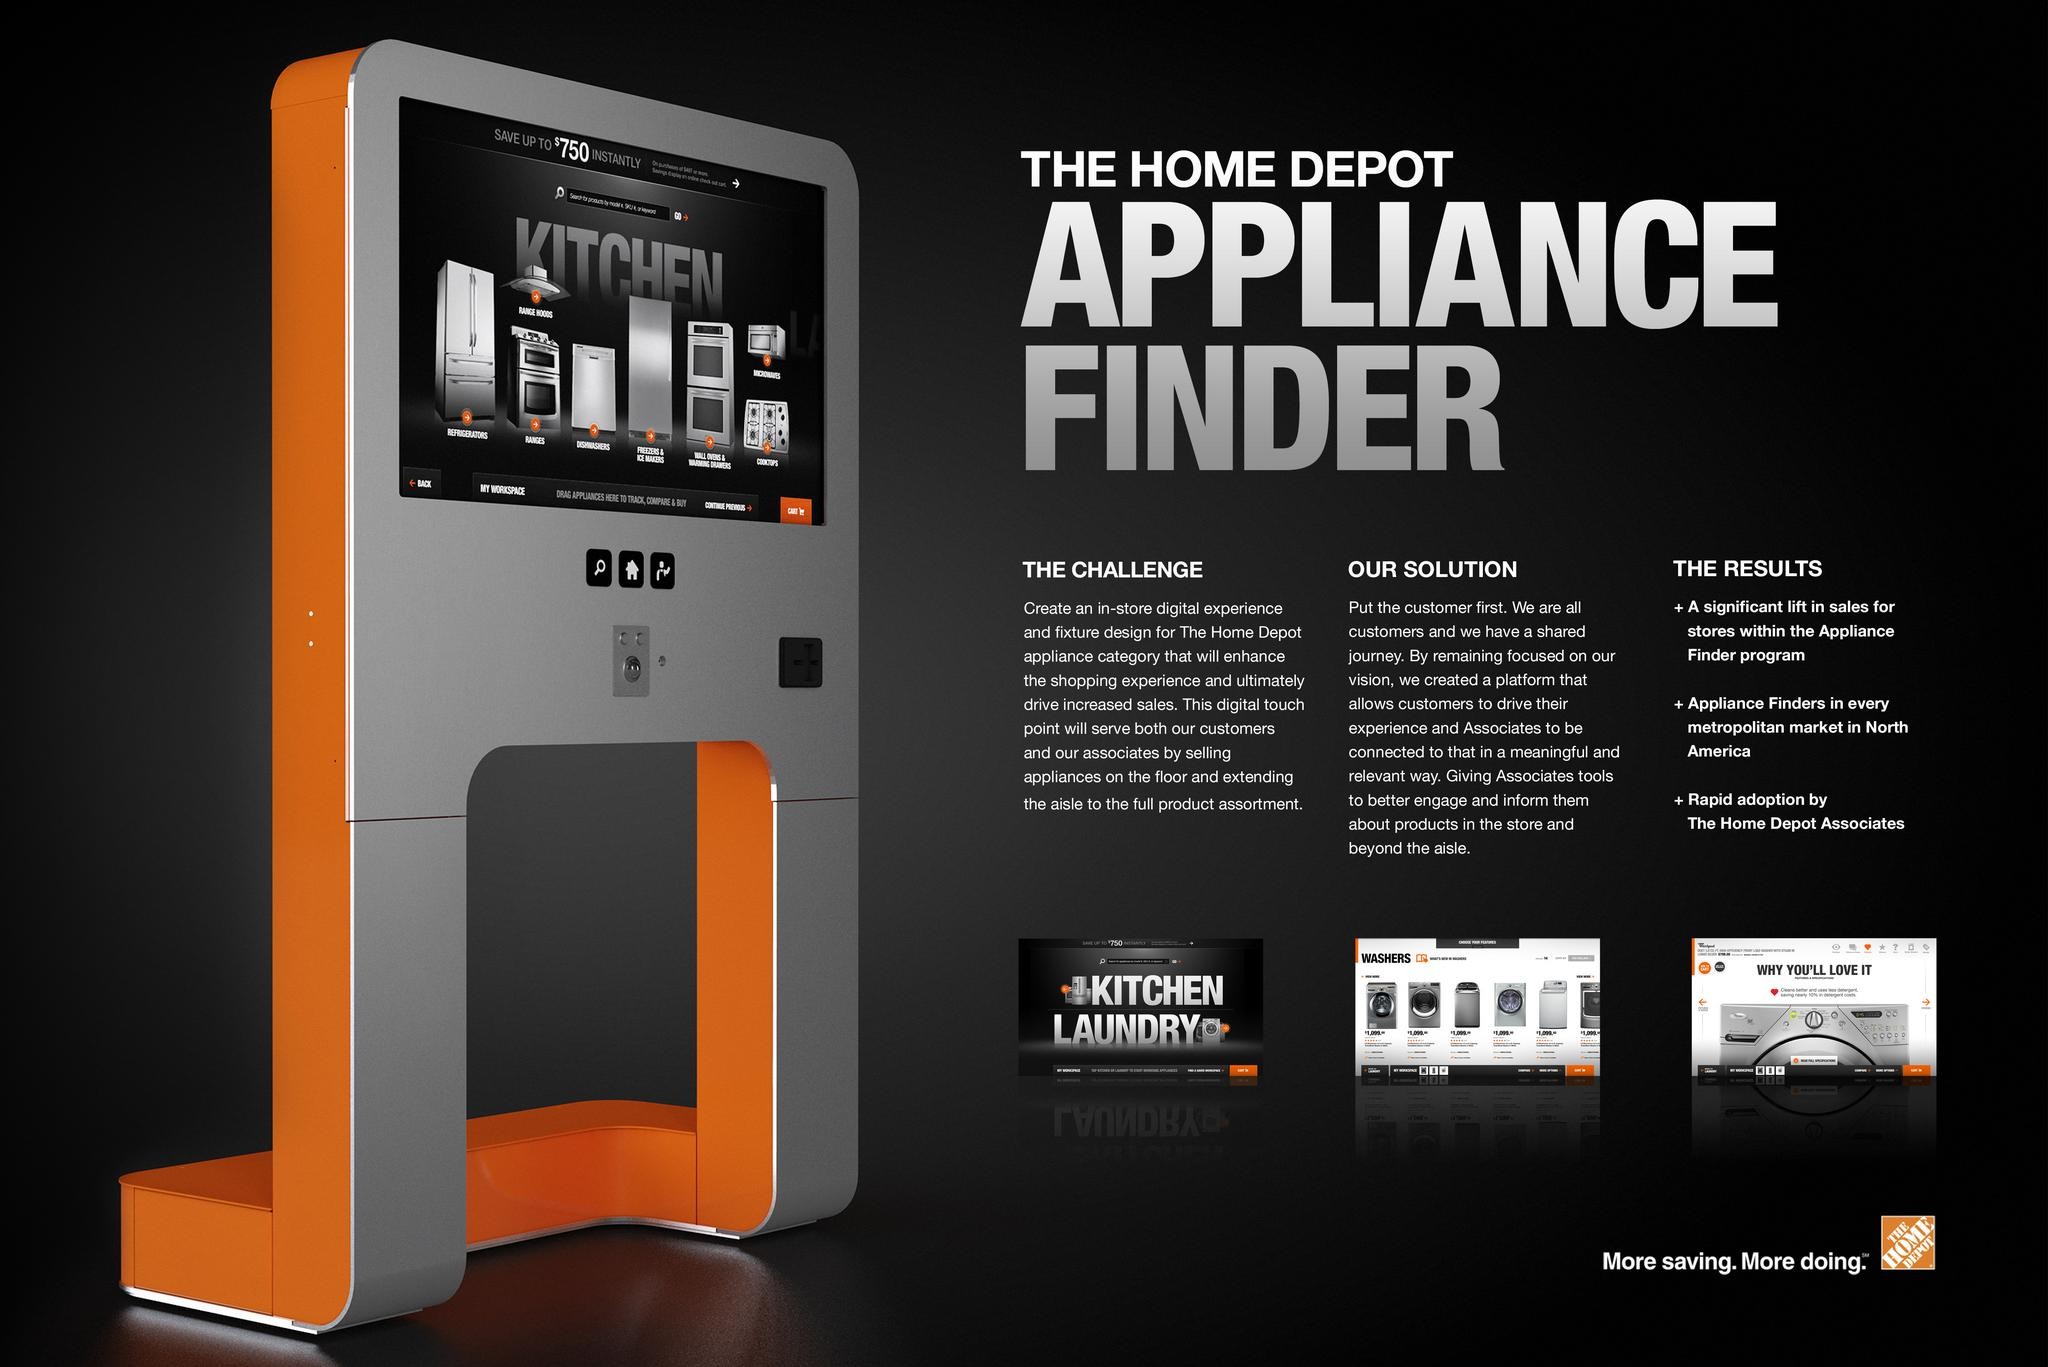 THE HOME DEPOT APPLIANCE EXPERIENCE